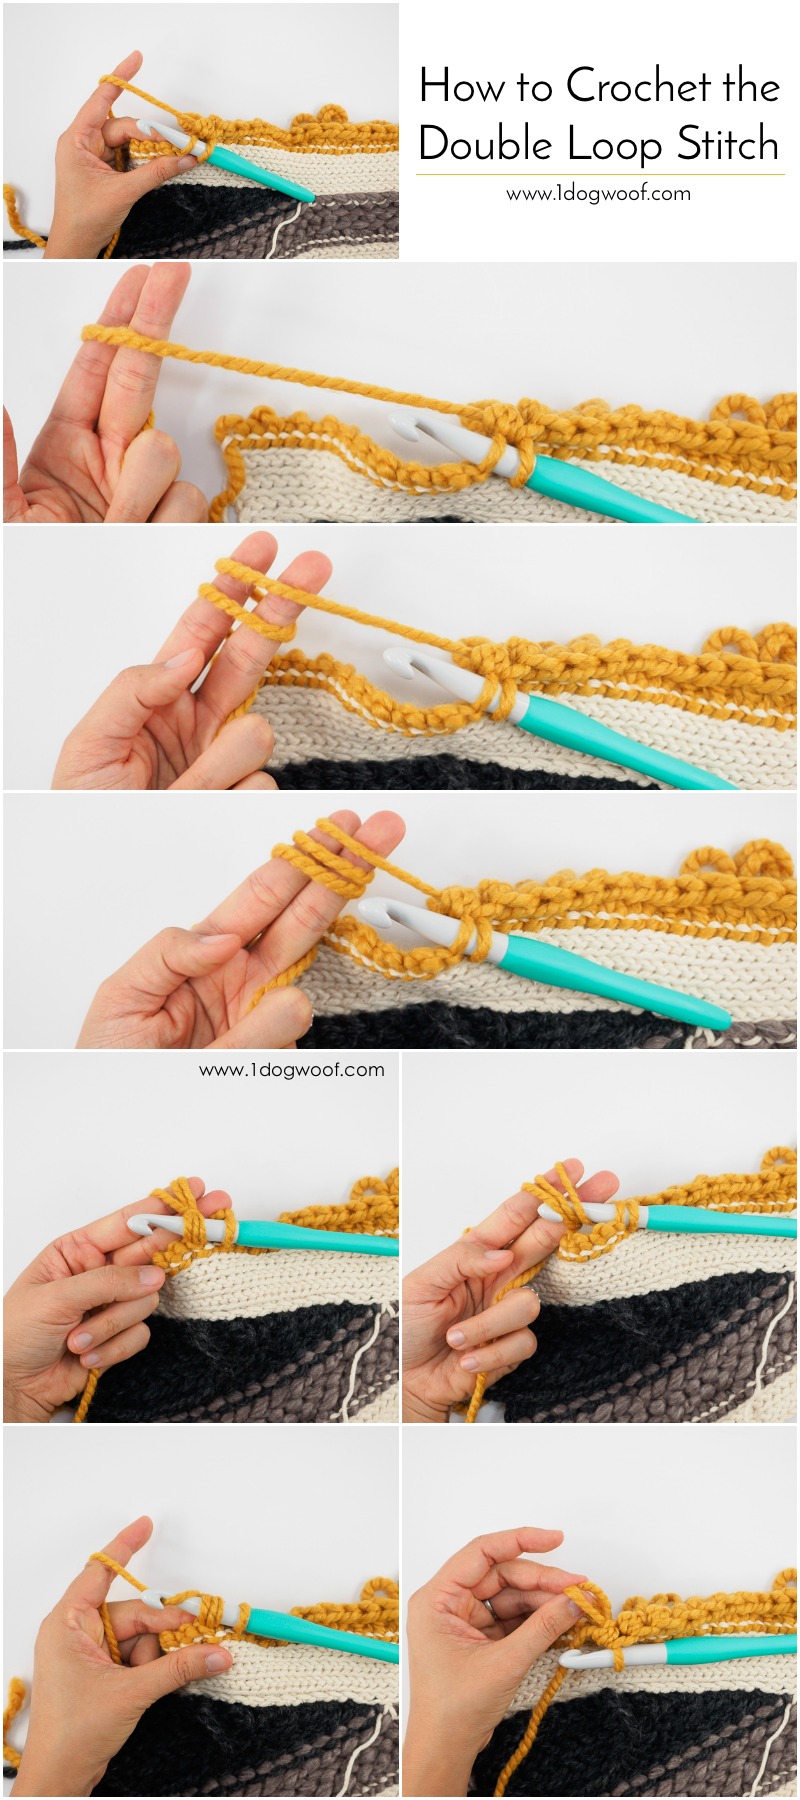 How to Crochet the Double Loop Stitch. This is such a fun stitch!